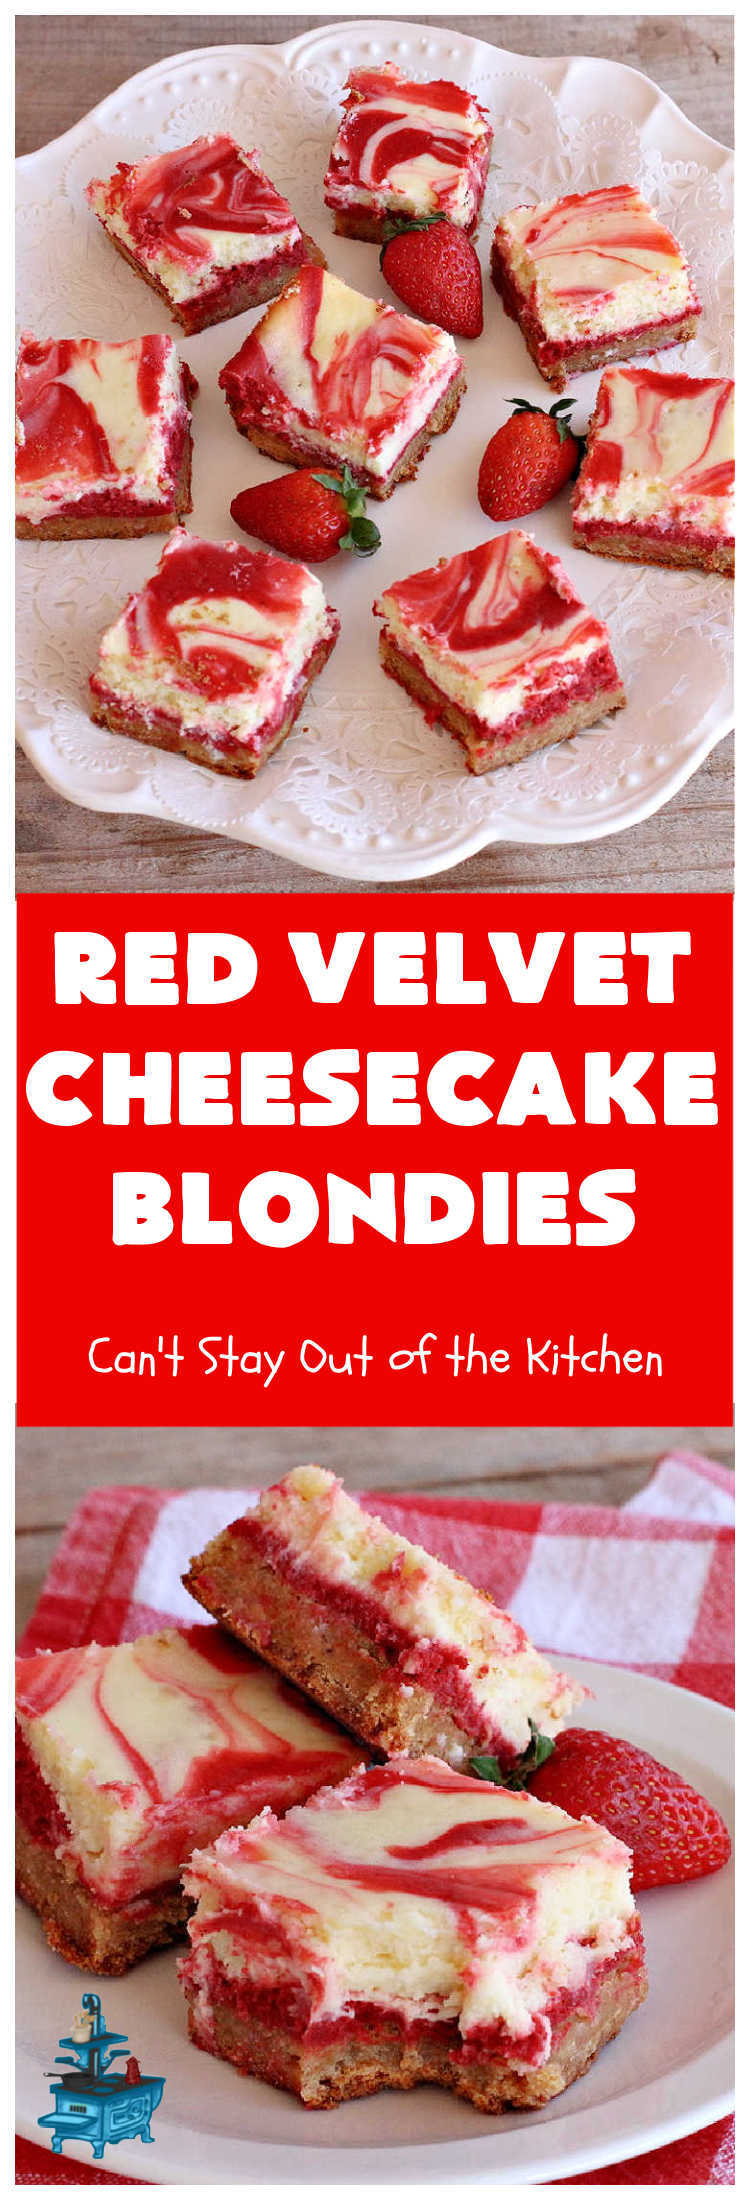 Red Velvet Cheesecake Blondies | Can't Stay Out of the Kitchen